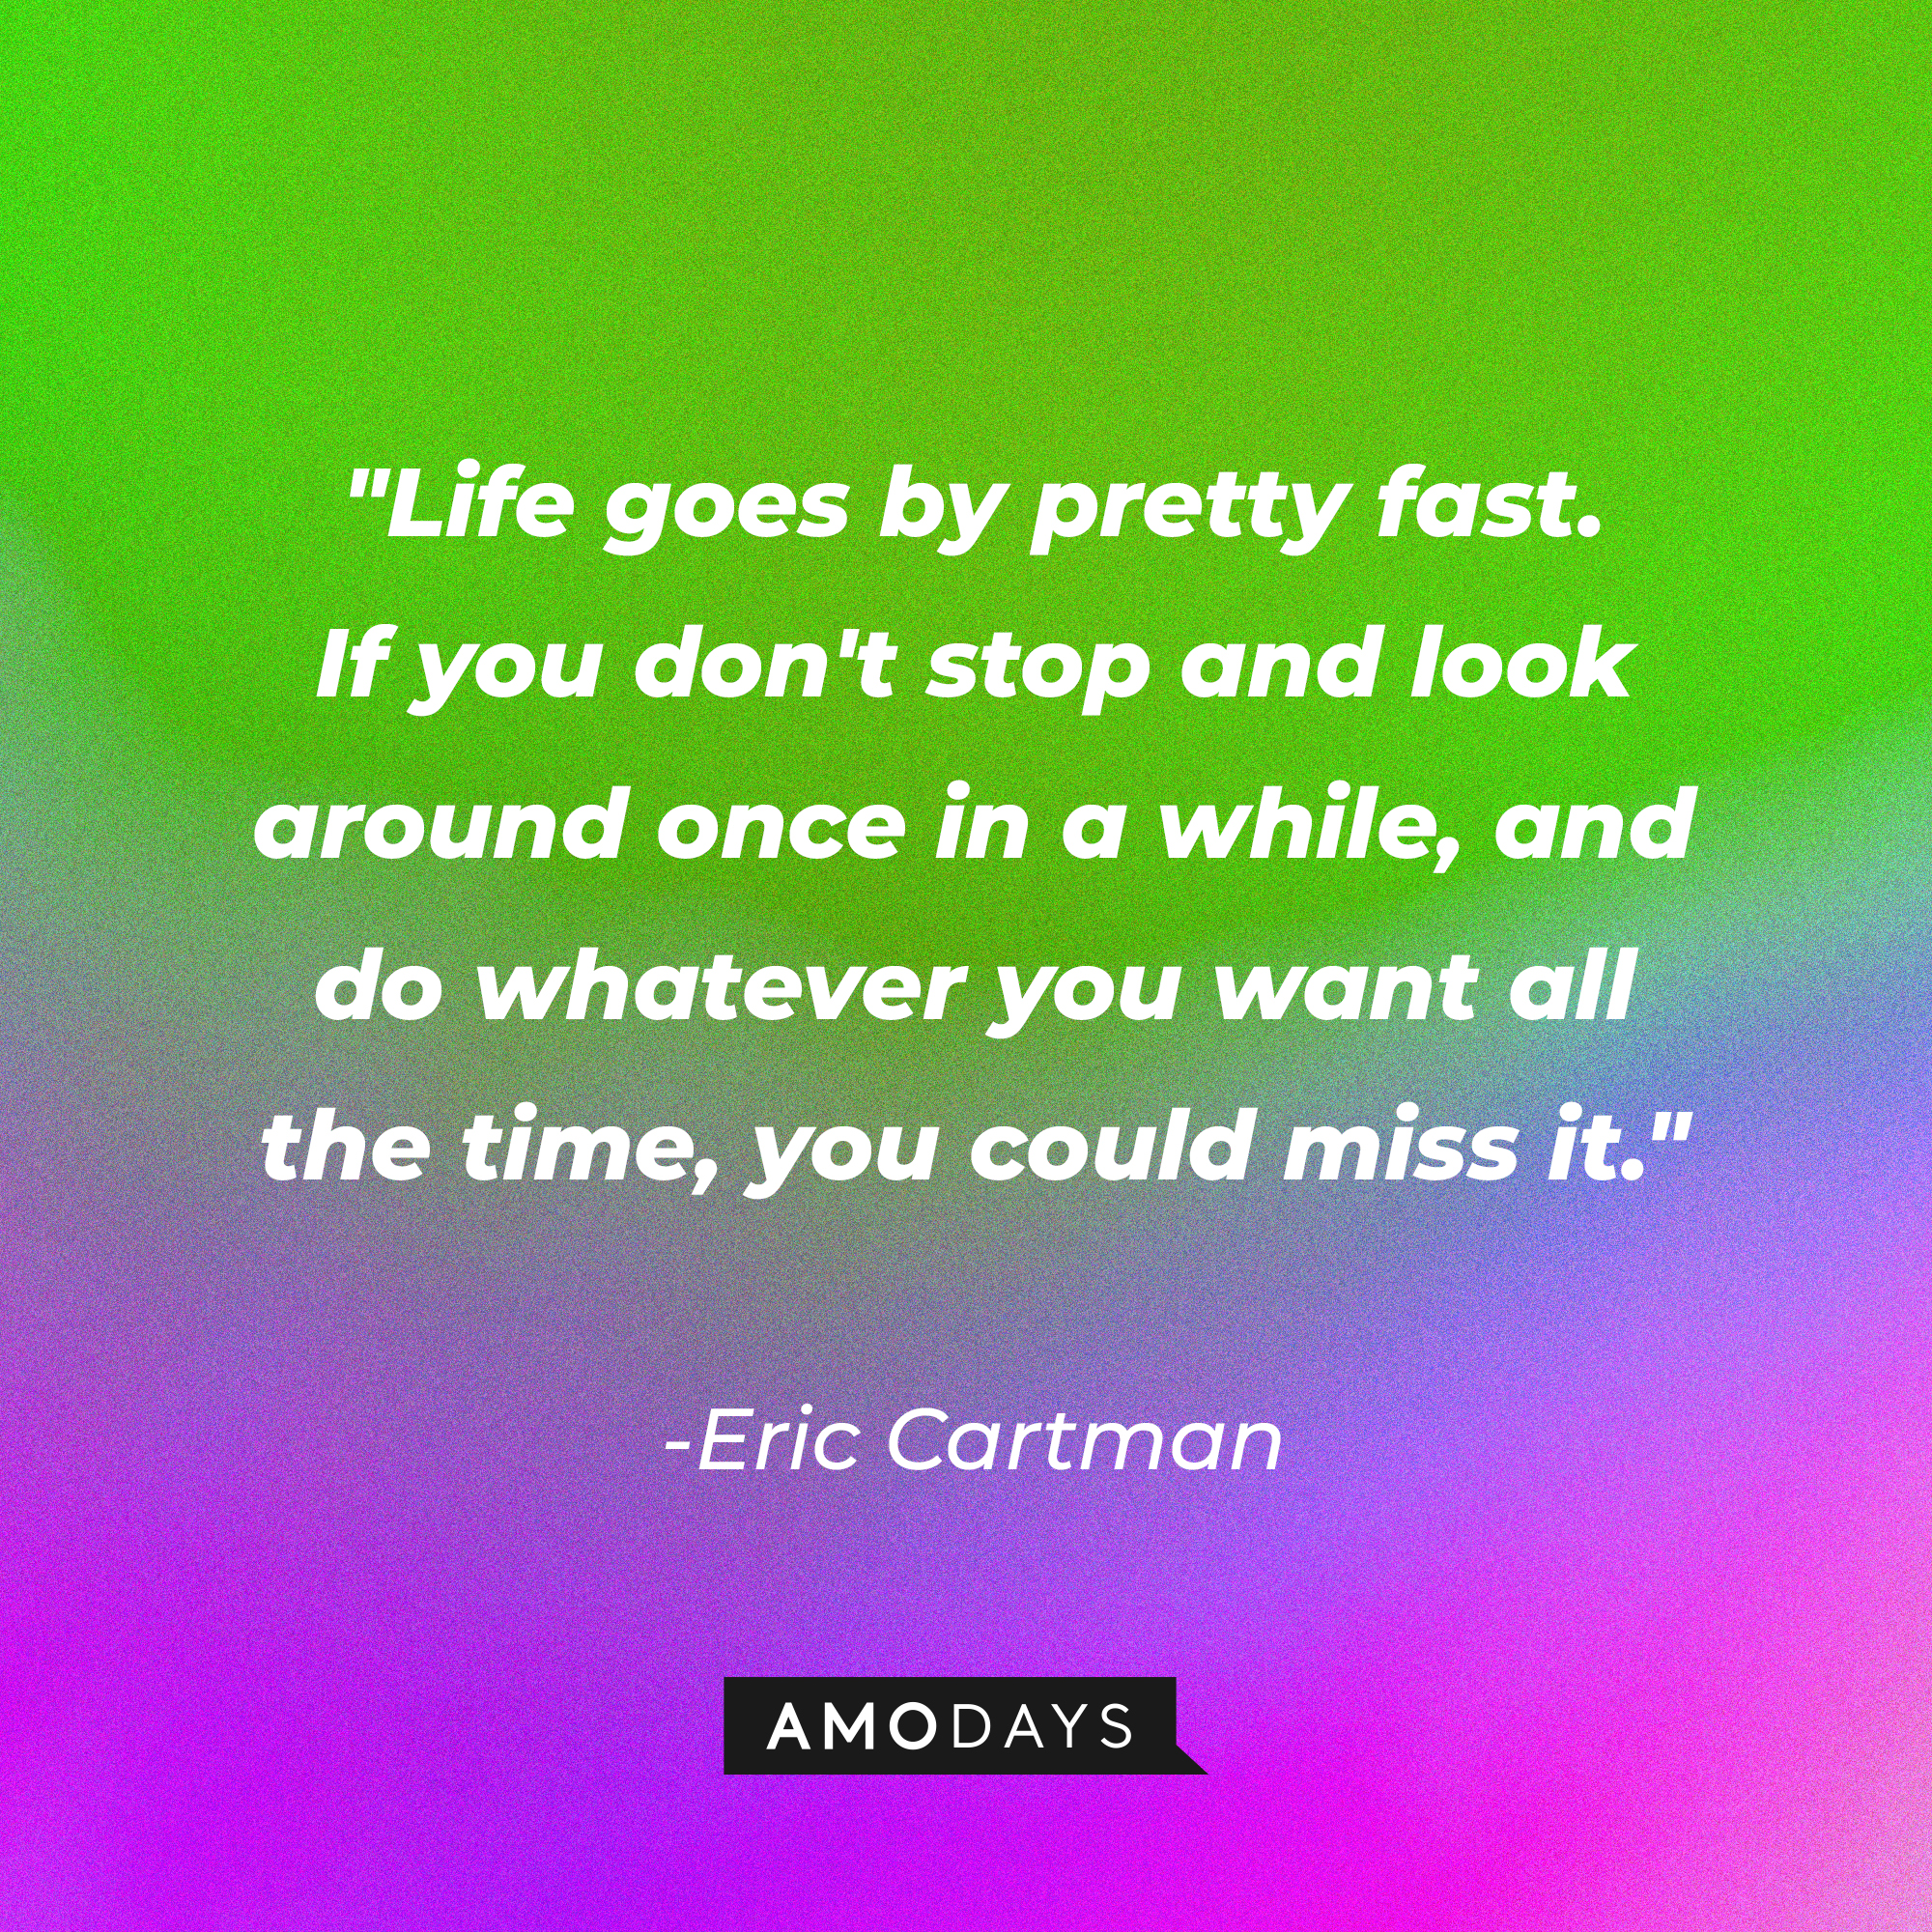 Eric Cartman's quote: "Life goes by pretty fast. If you don't stop and look around once in a while, and do whatever you want all the time, you could miss it." | Source: AmoDays